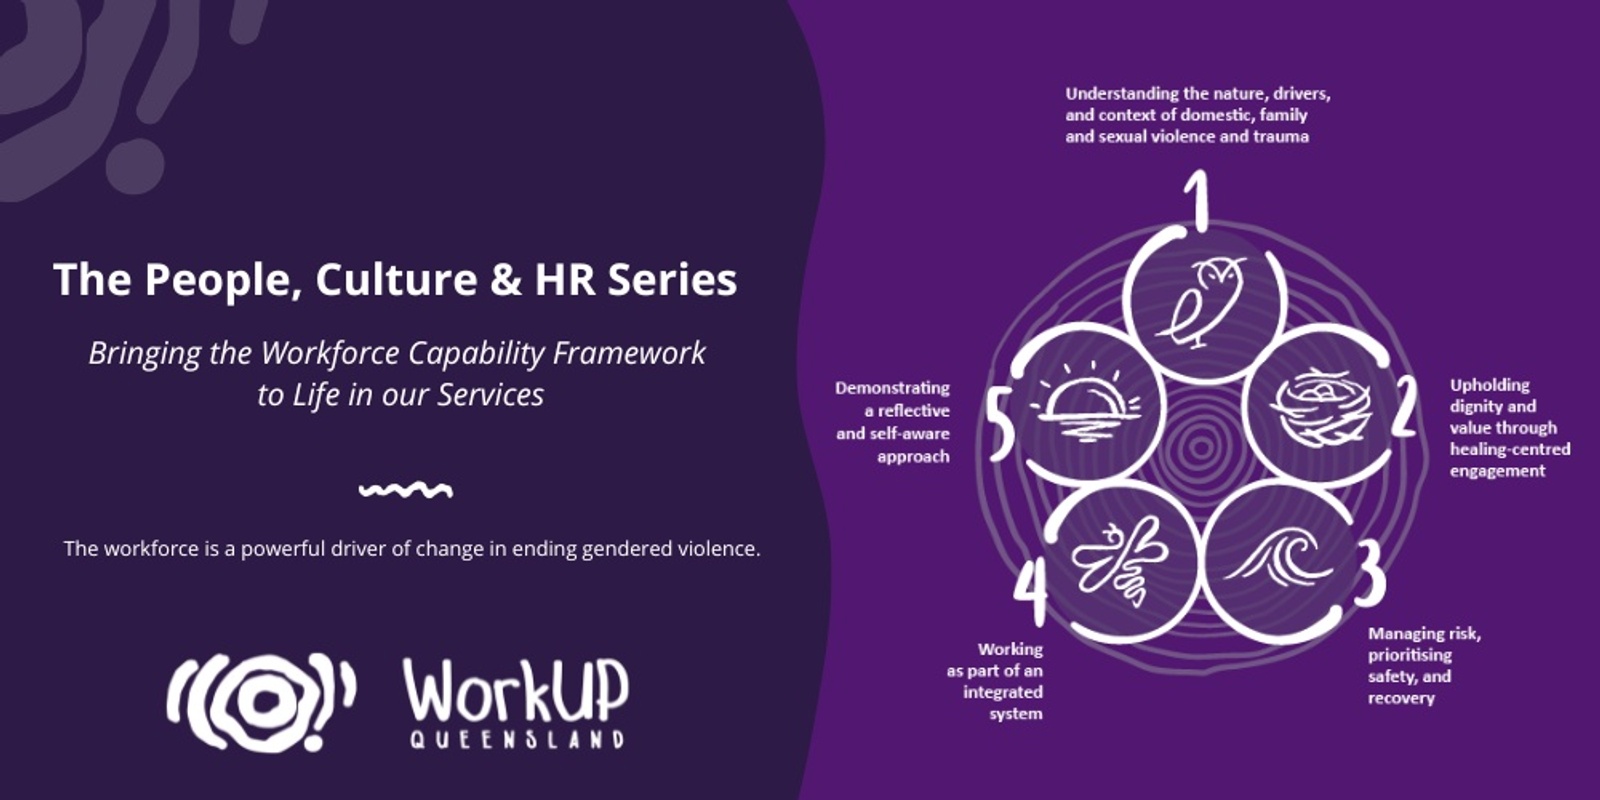 The People, Culture & HR Series